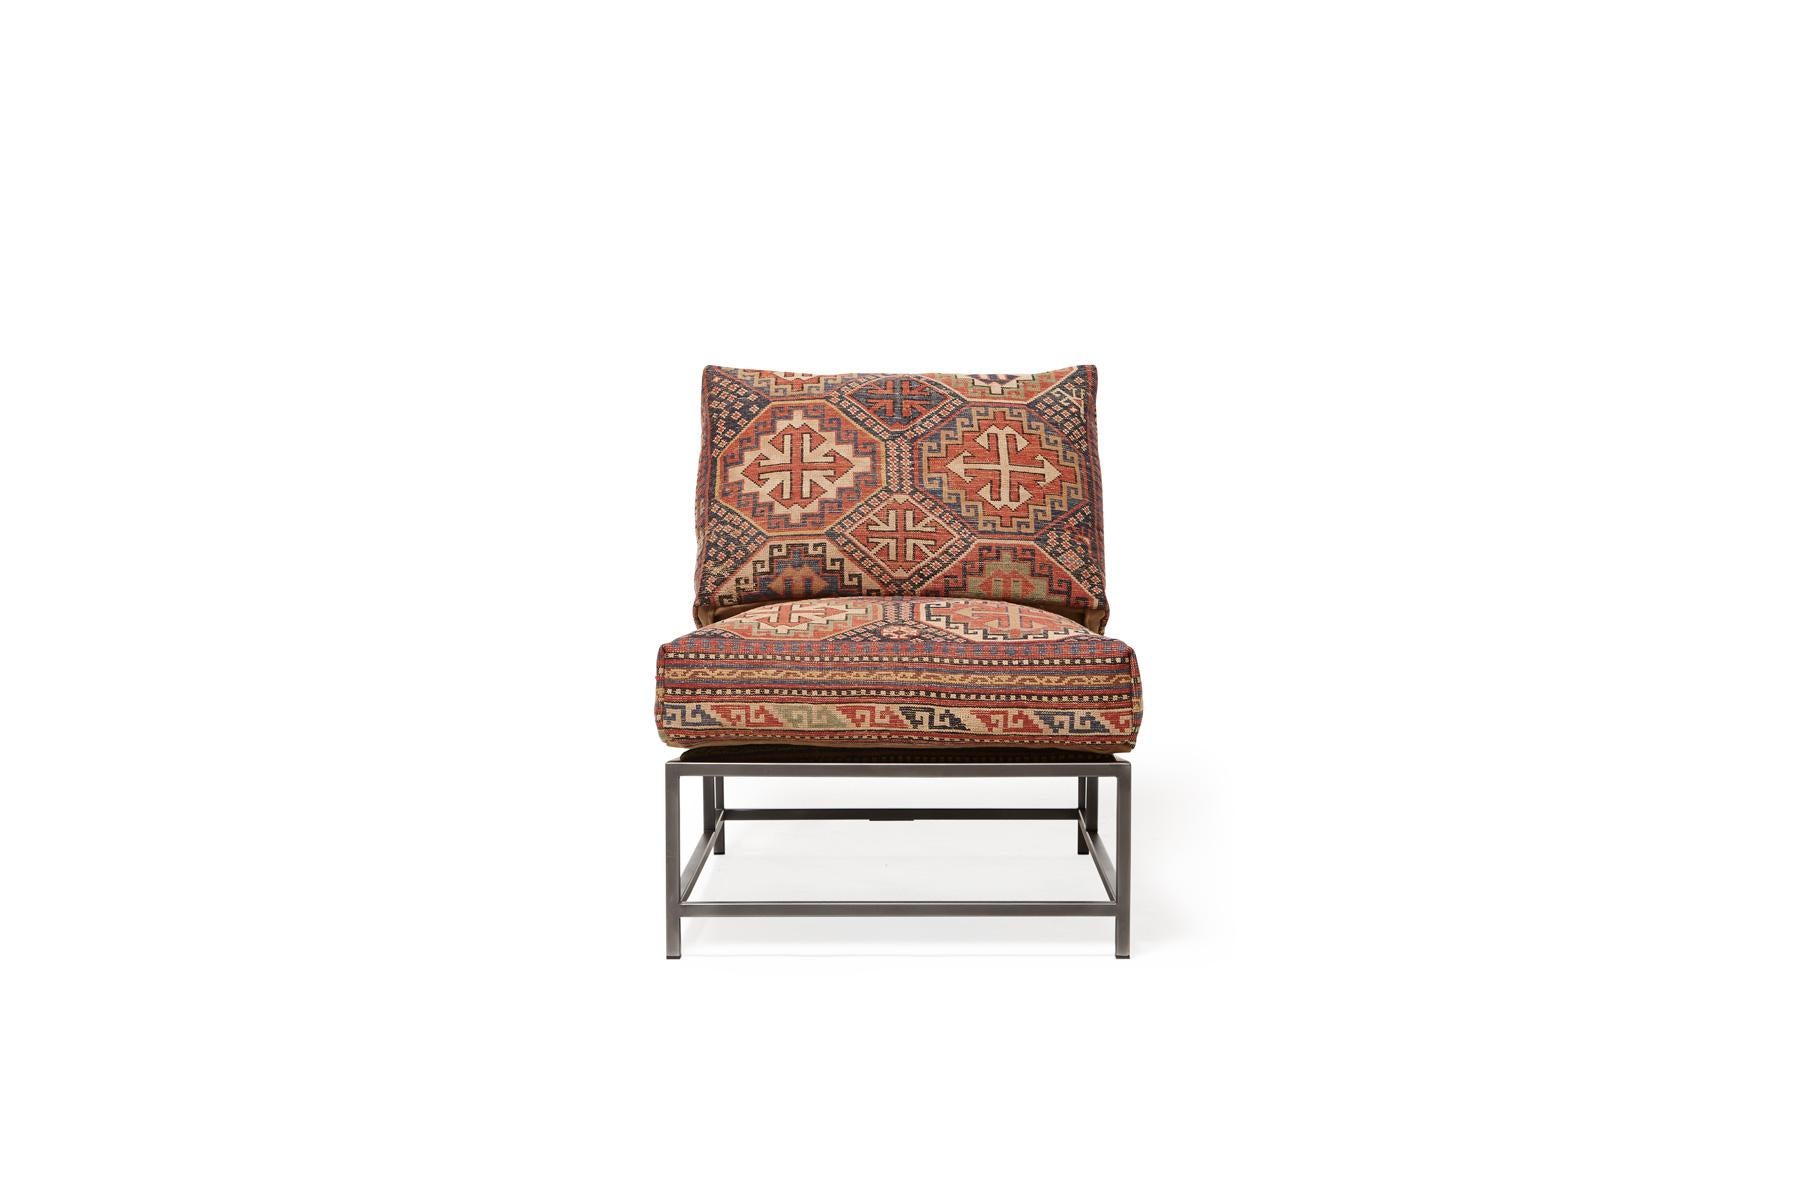 This chair, in the style of Stephen's Kenn Inheritance Collection, has been upholstered with an antique rug from the collection of King Kennedy rugs. The textile has been lovingly repaired and reinforced, without losing any of the beautiful